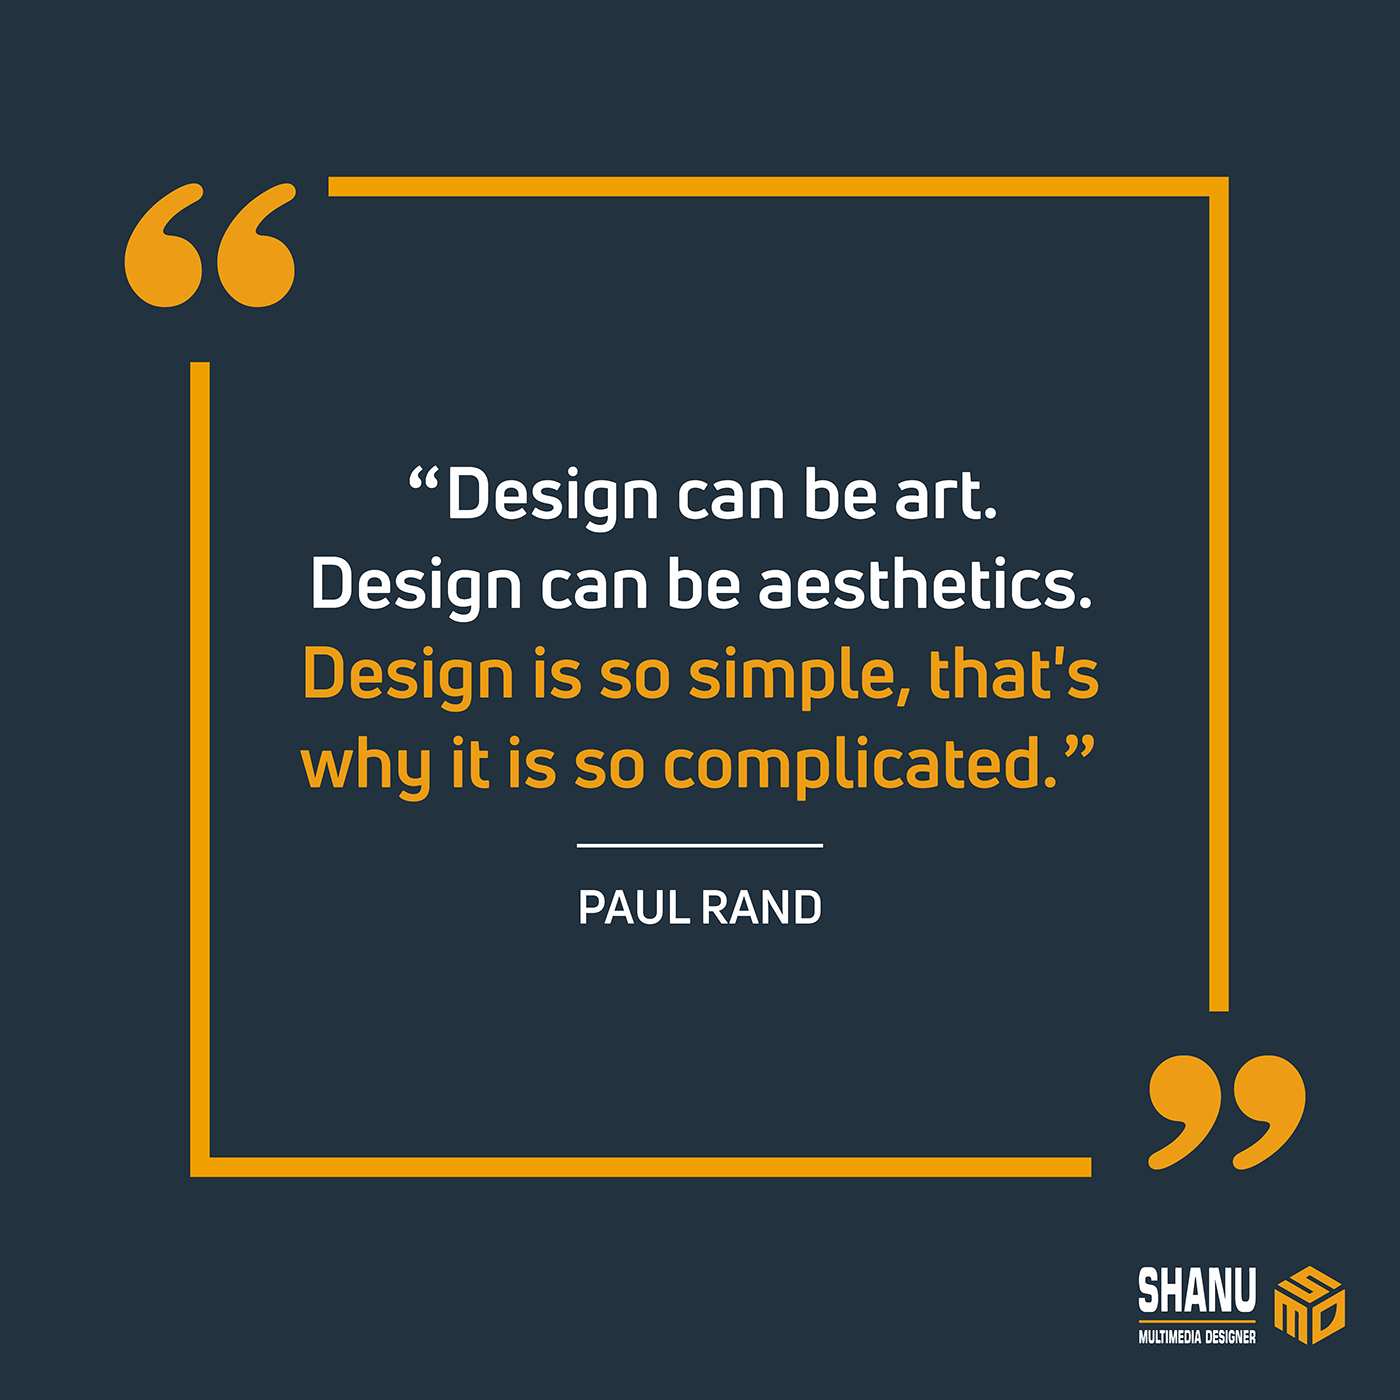 Social media post fact Did You Know post designer Paul Rand